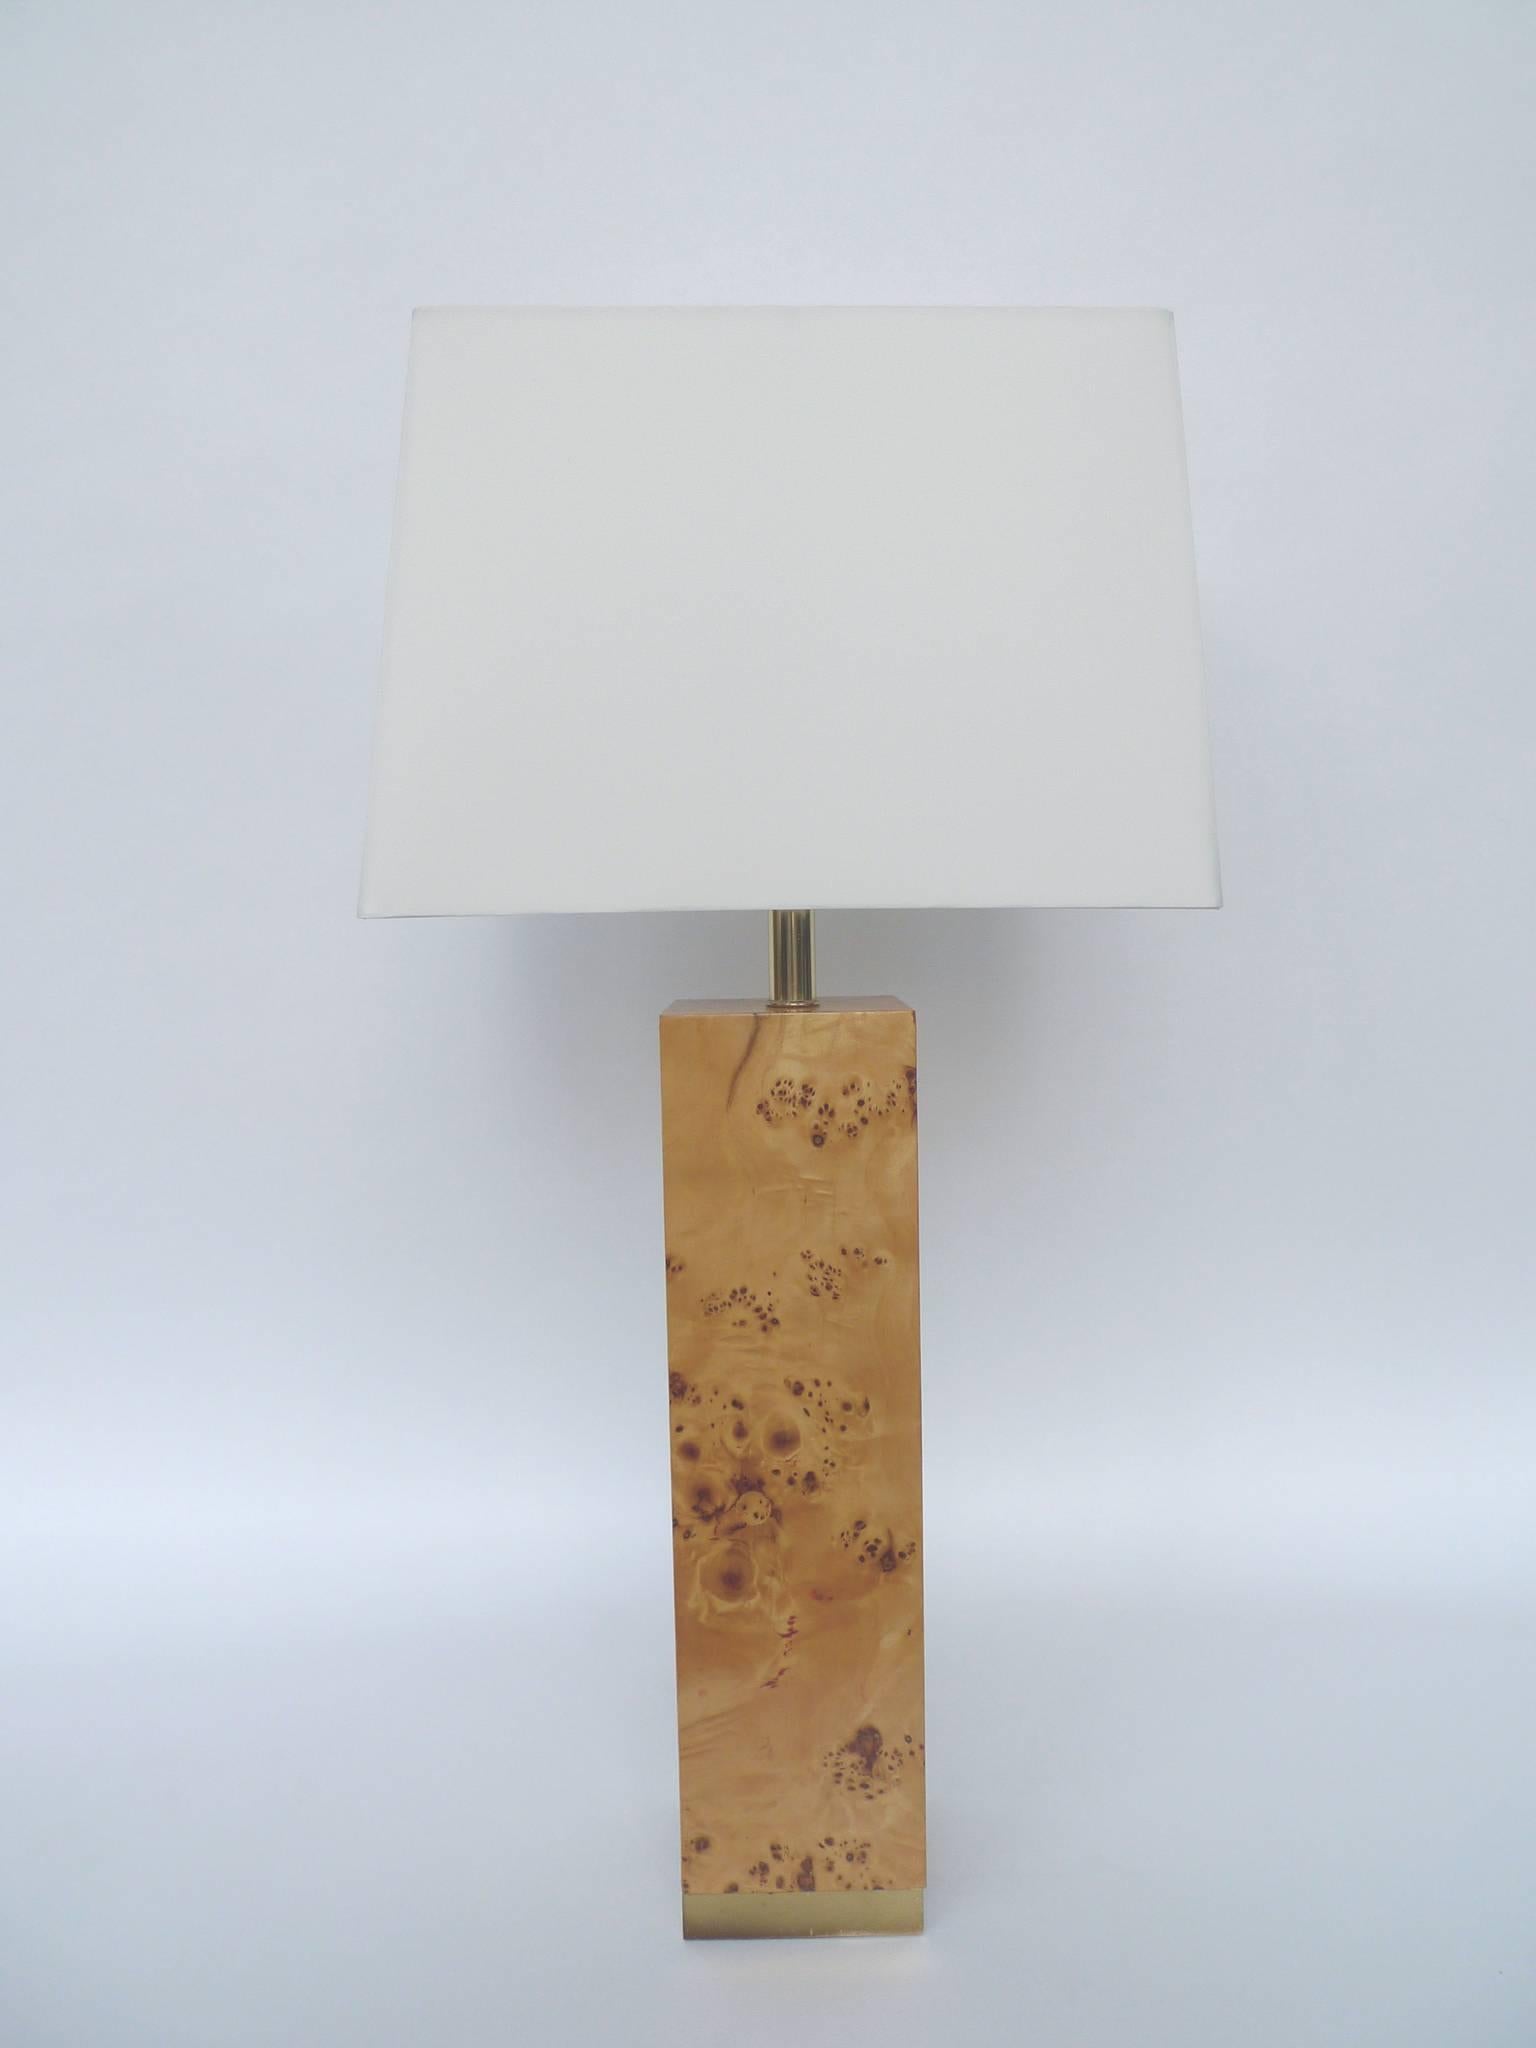 These columnar lamps are crafted from lacquered burl wood. They resemble the designs of Milo Baughman, whose work make beautiful use of simplicity and clean lines, utilizing the inherent qualities of the materials as the decorative elements of his